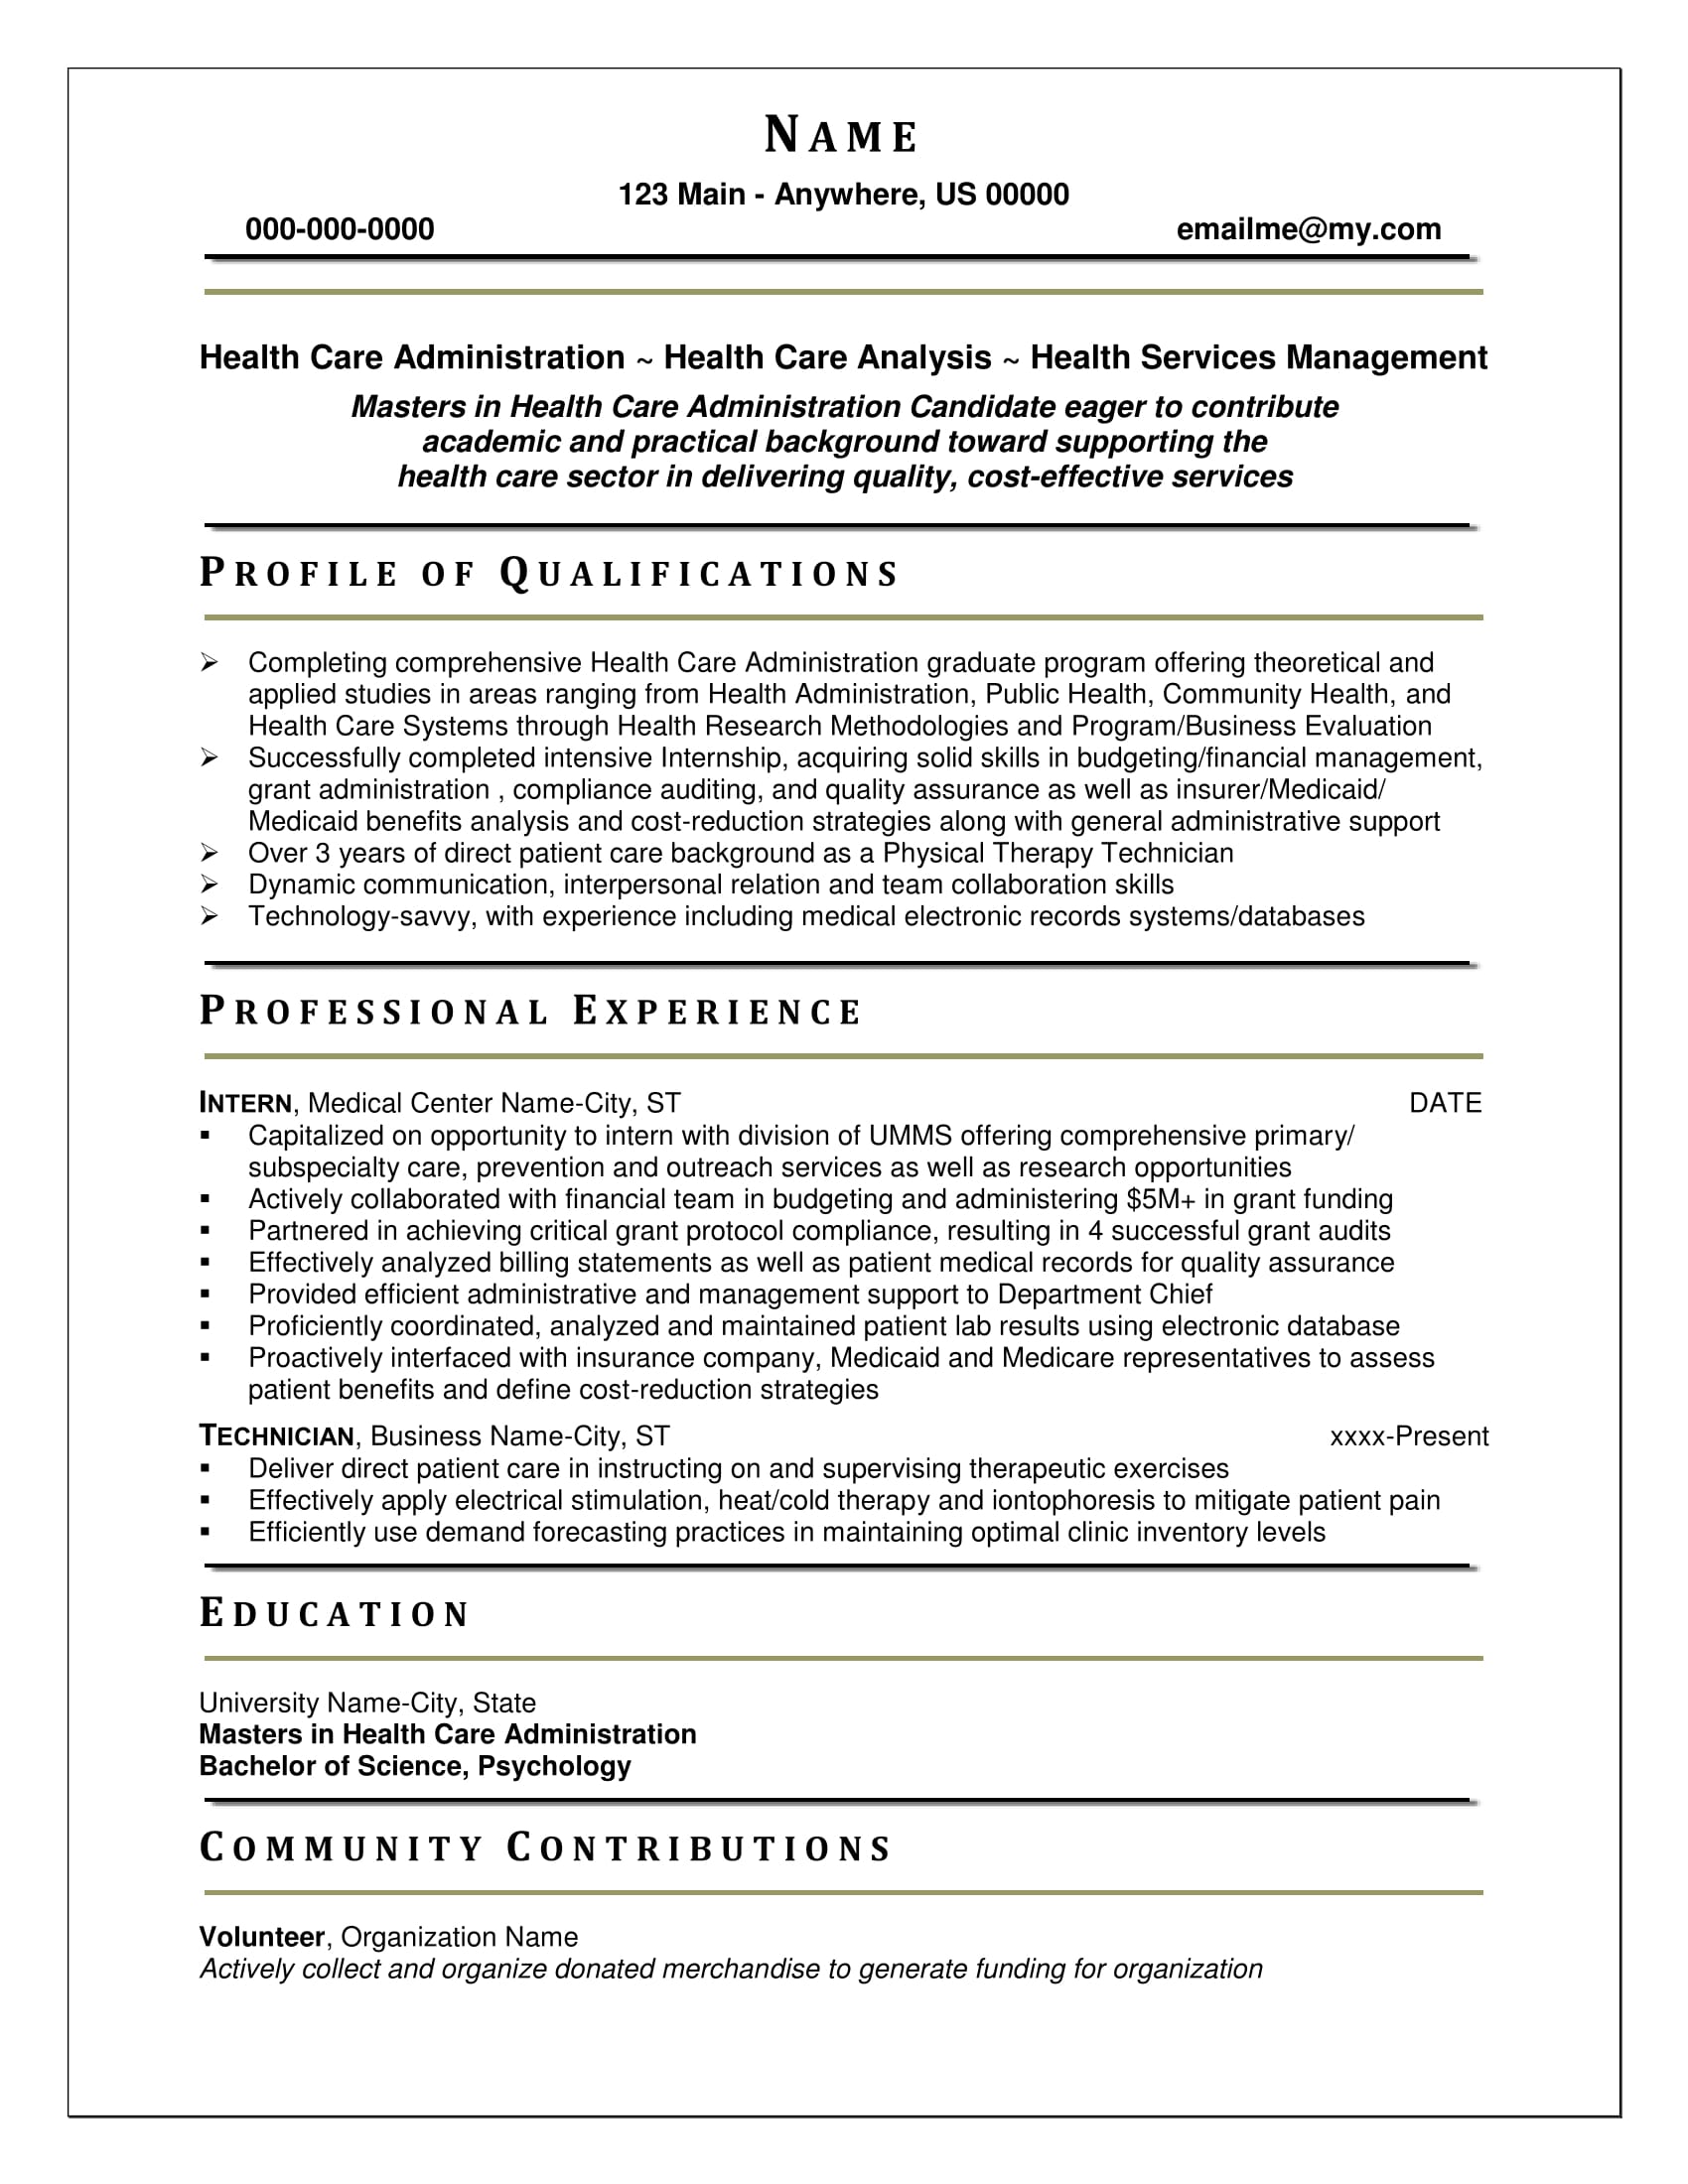 Buy resume for writing group